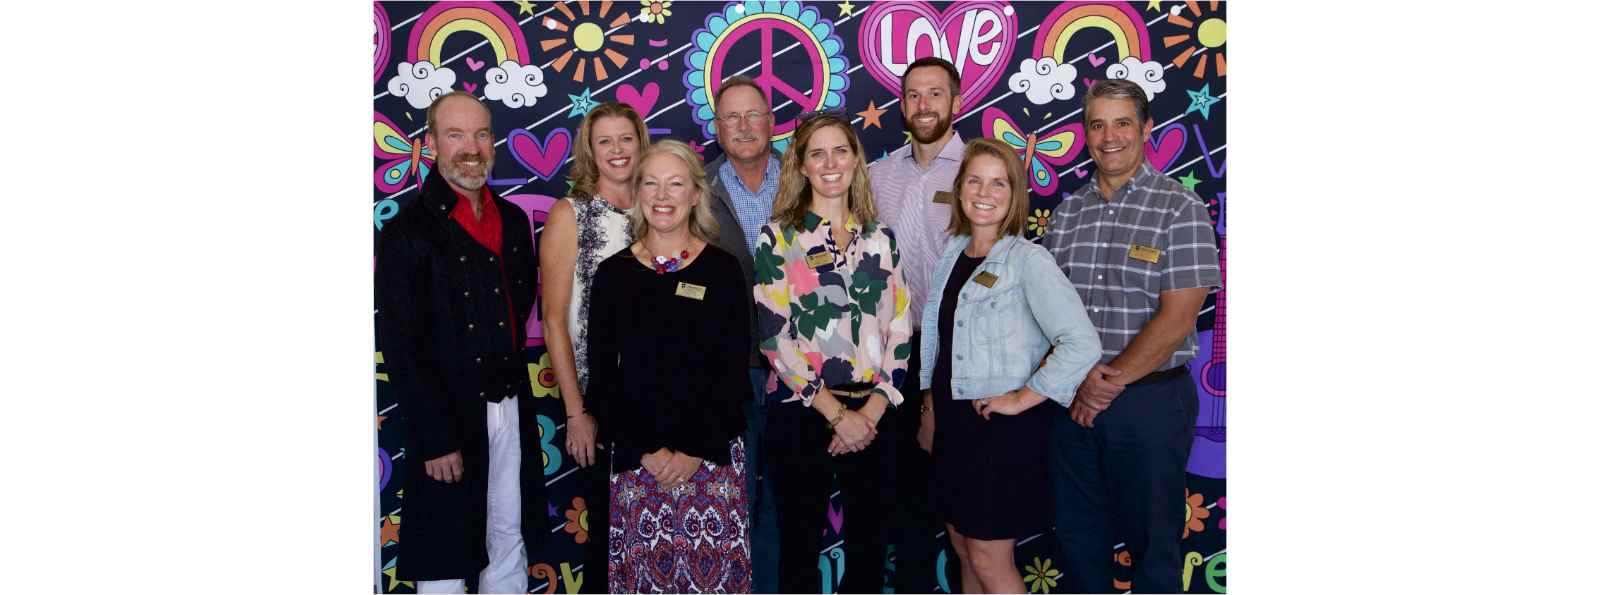 Truckee Chamber Awards Event Brings Community Together